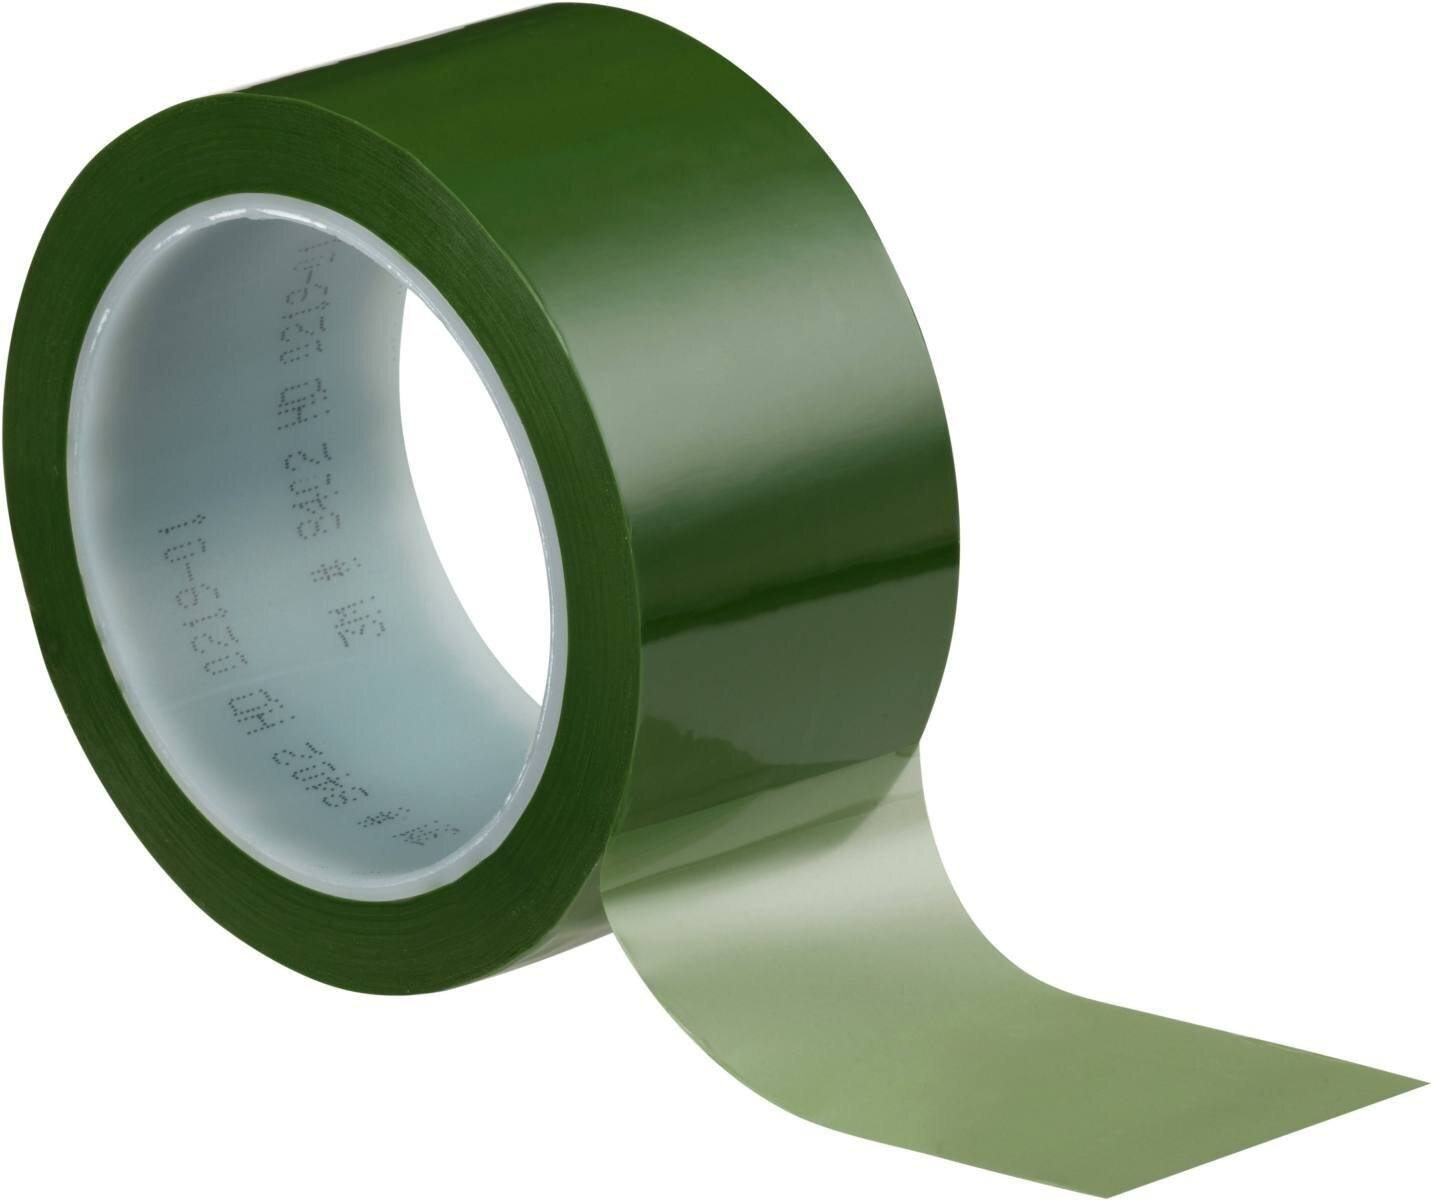 3M polyester adhesive tape 8402 50mmx66m green